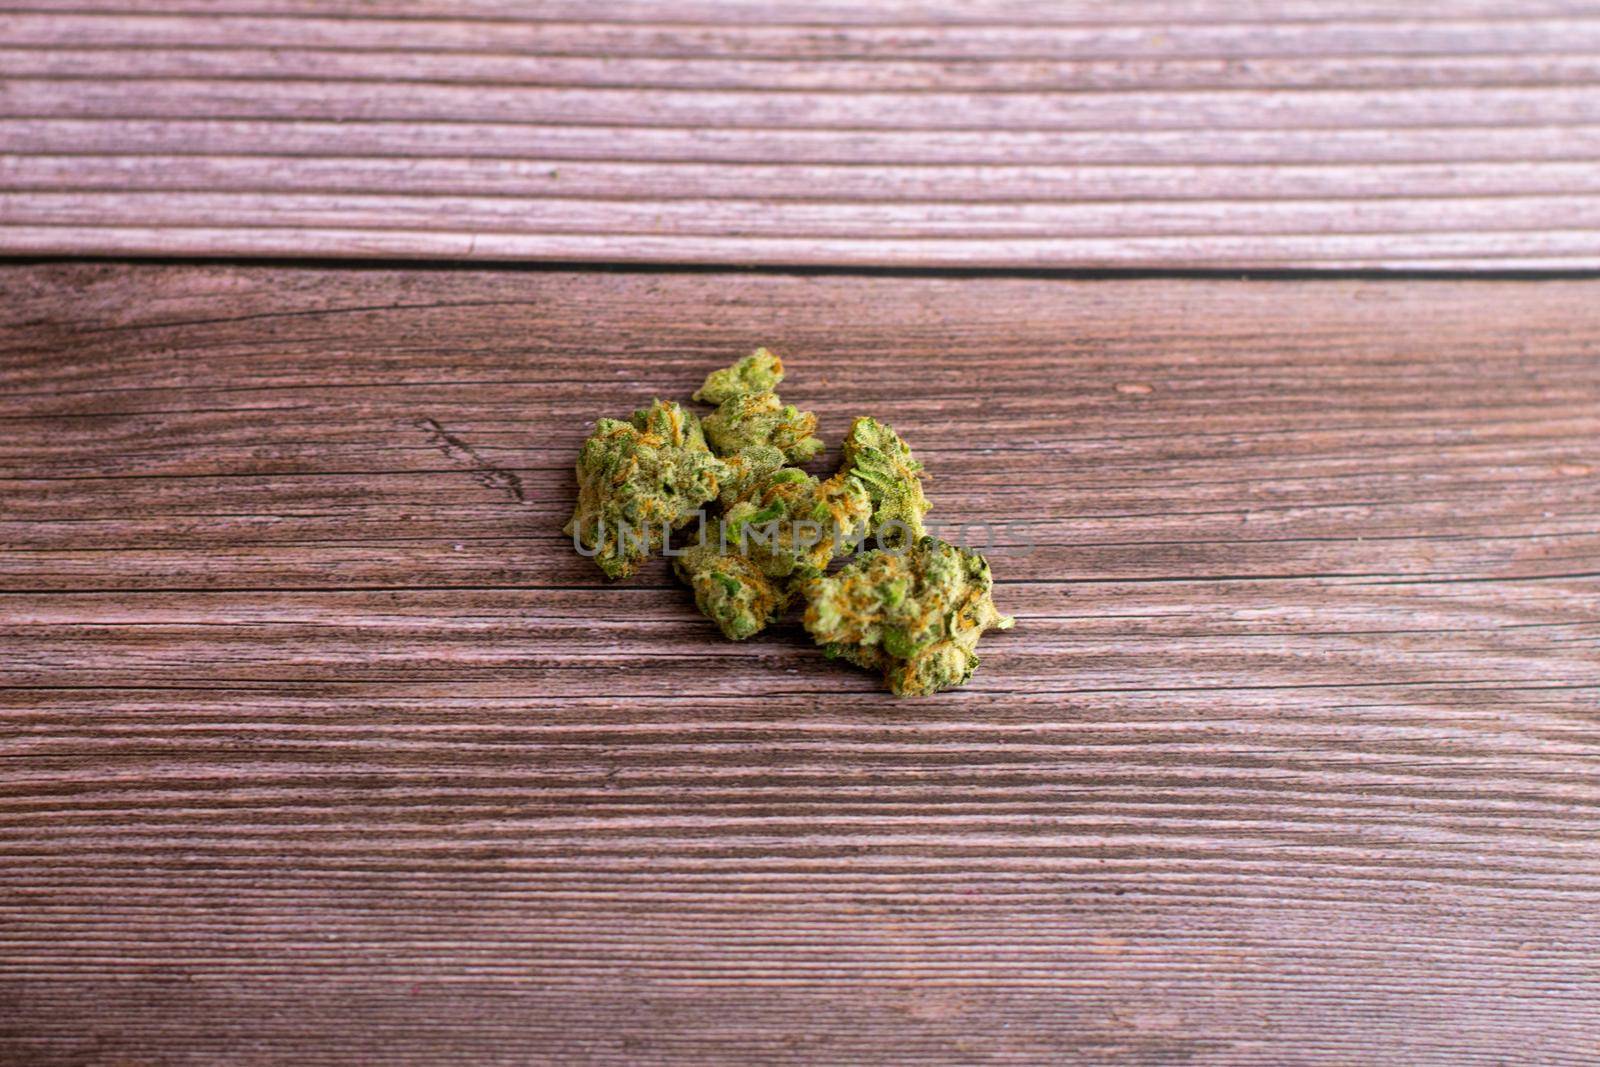 A Small Pile of Cannabis on a Brown Wooden Background by bju12290